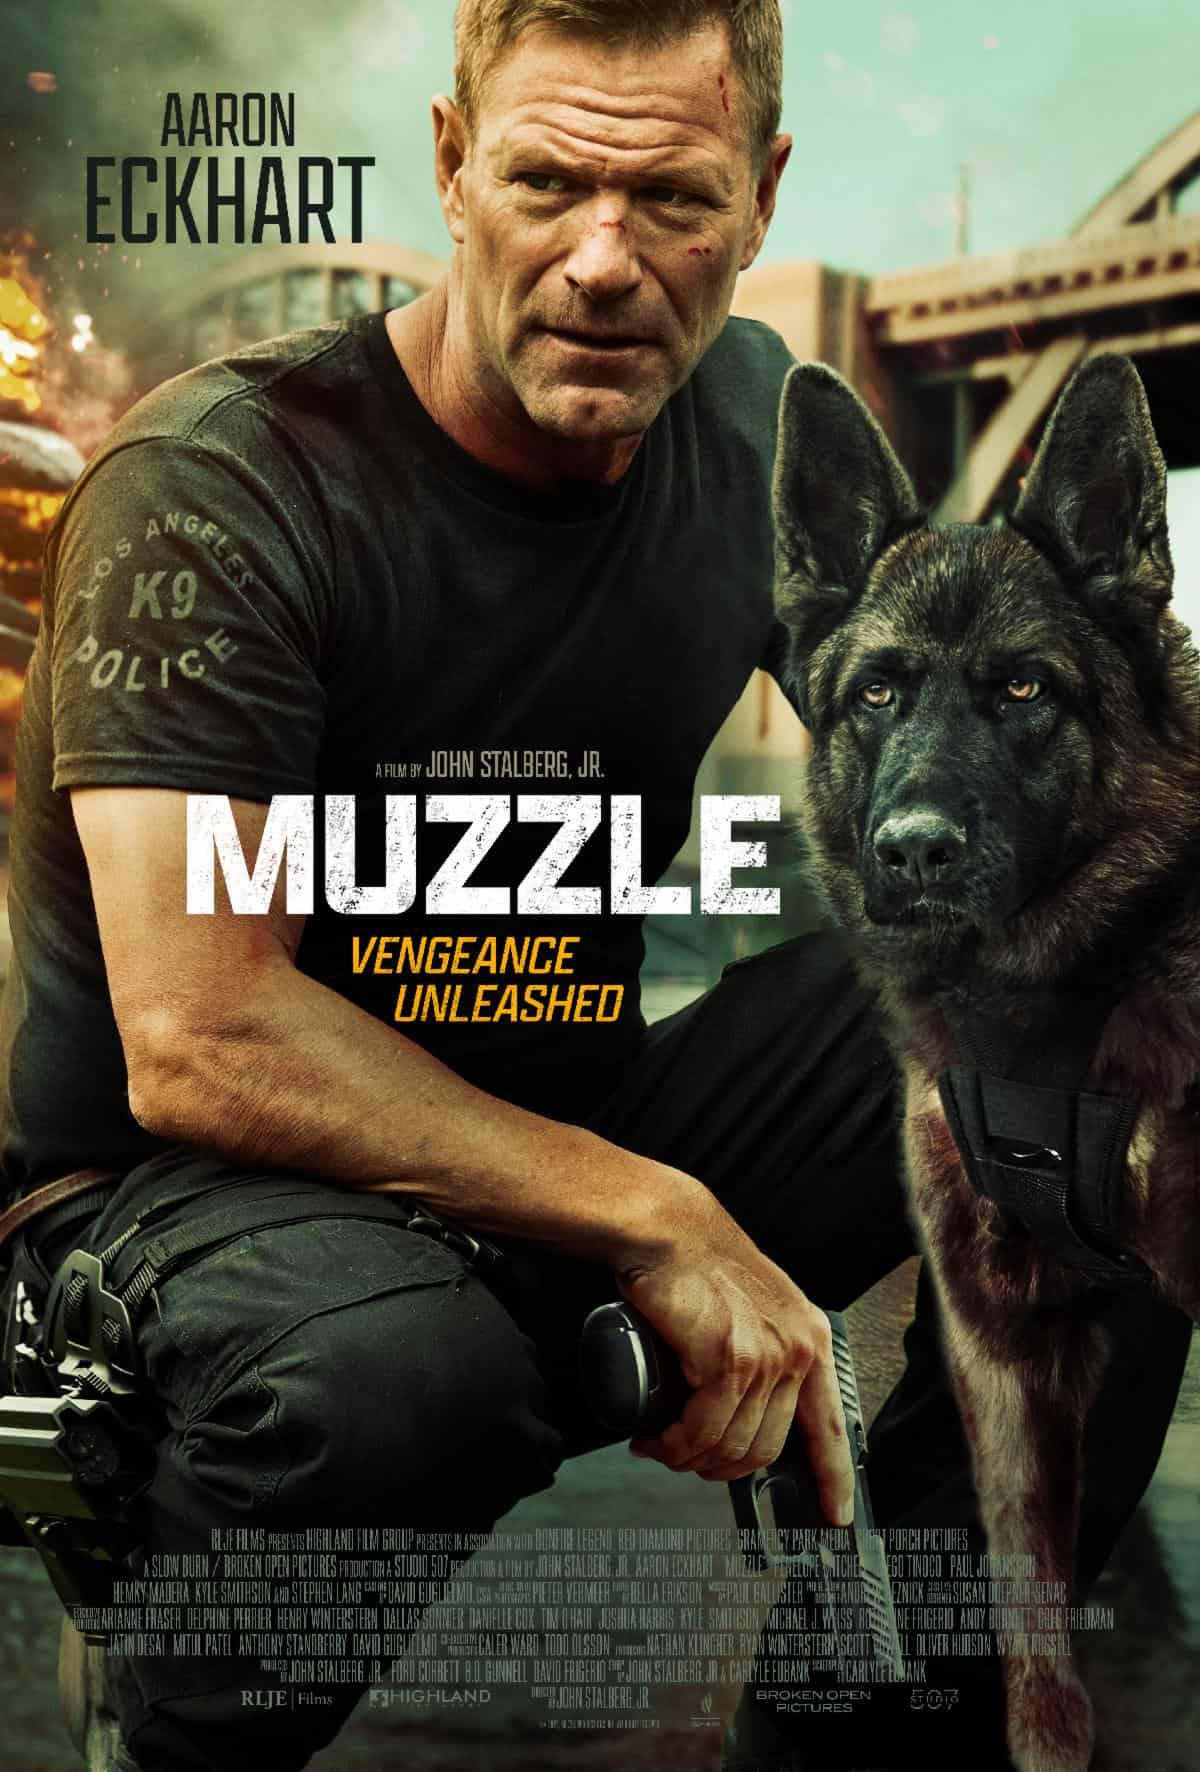 Aaron Eckhart Goes Rogue in New Revenge Thriller Muzzle 19